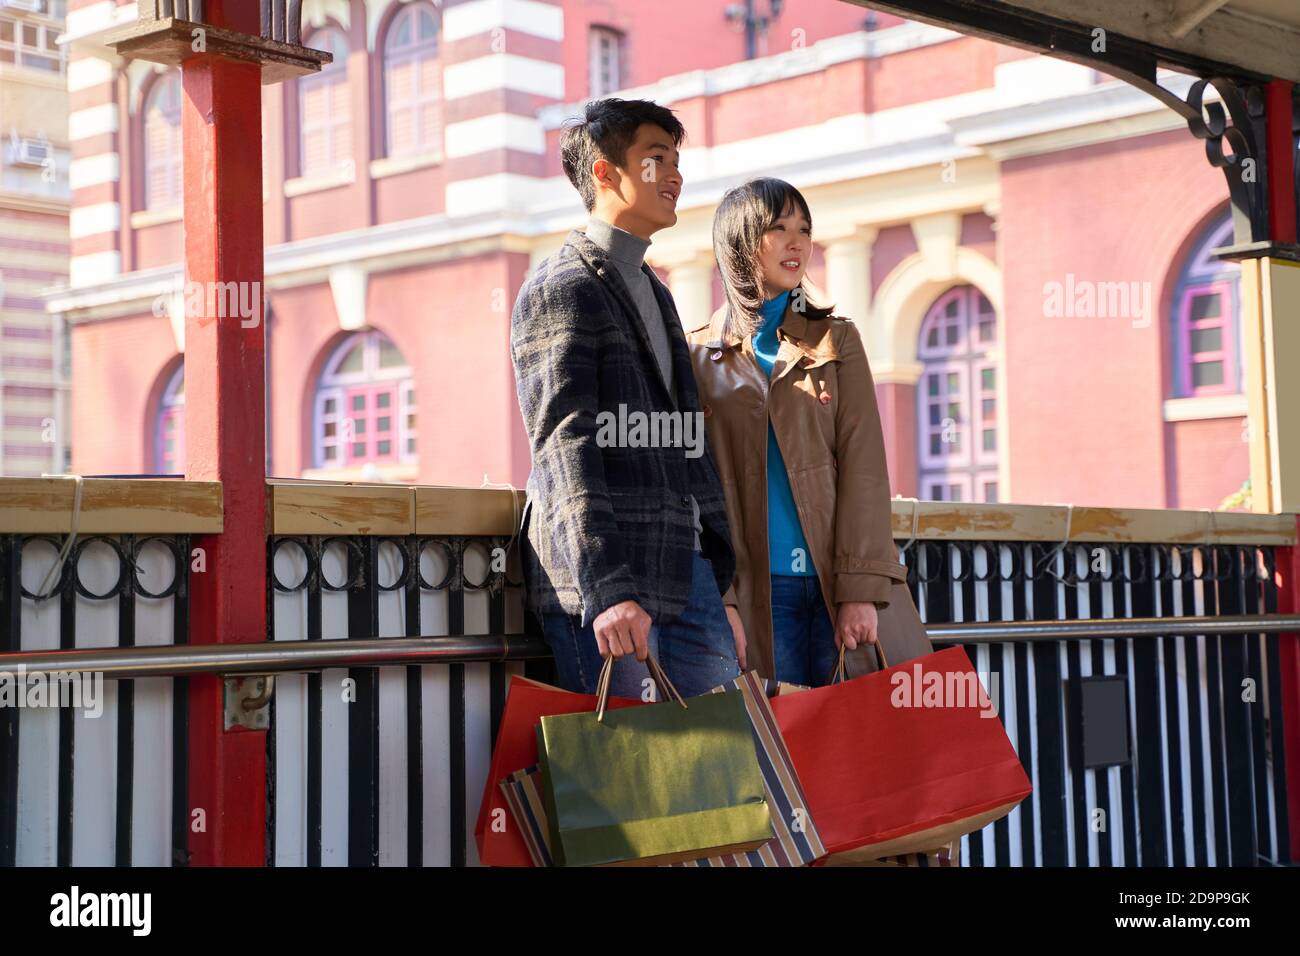 young asian couple standing on a pedestrian overpass holding shopping bags Stock Photo